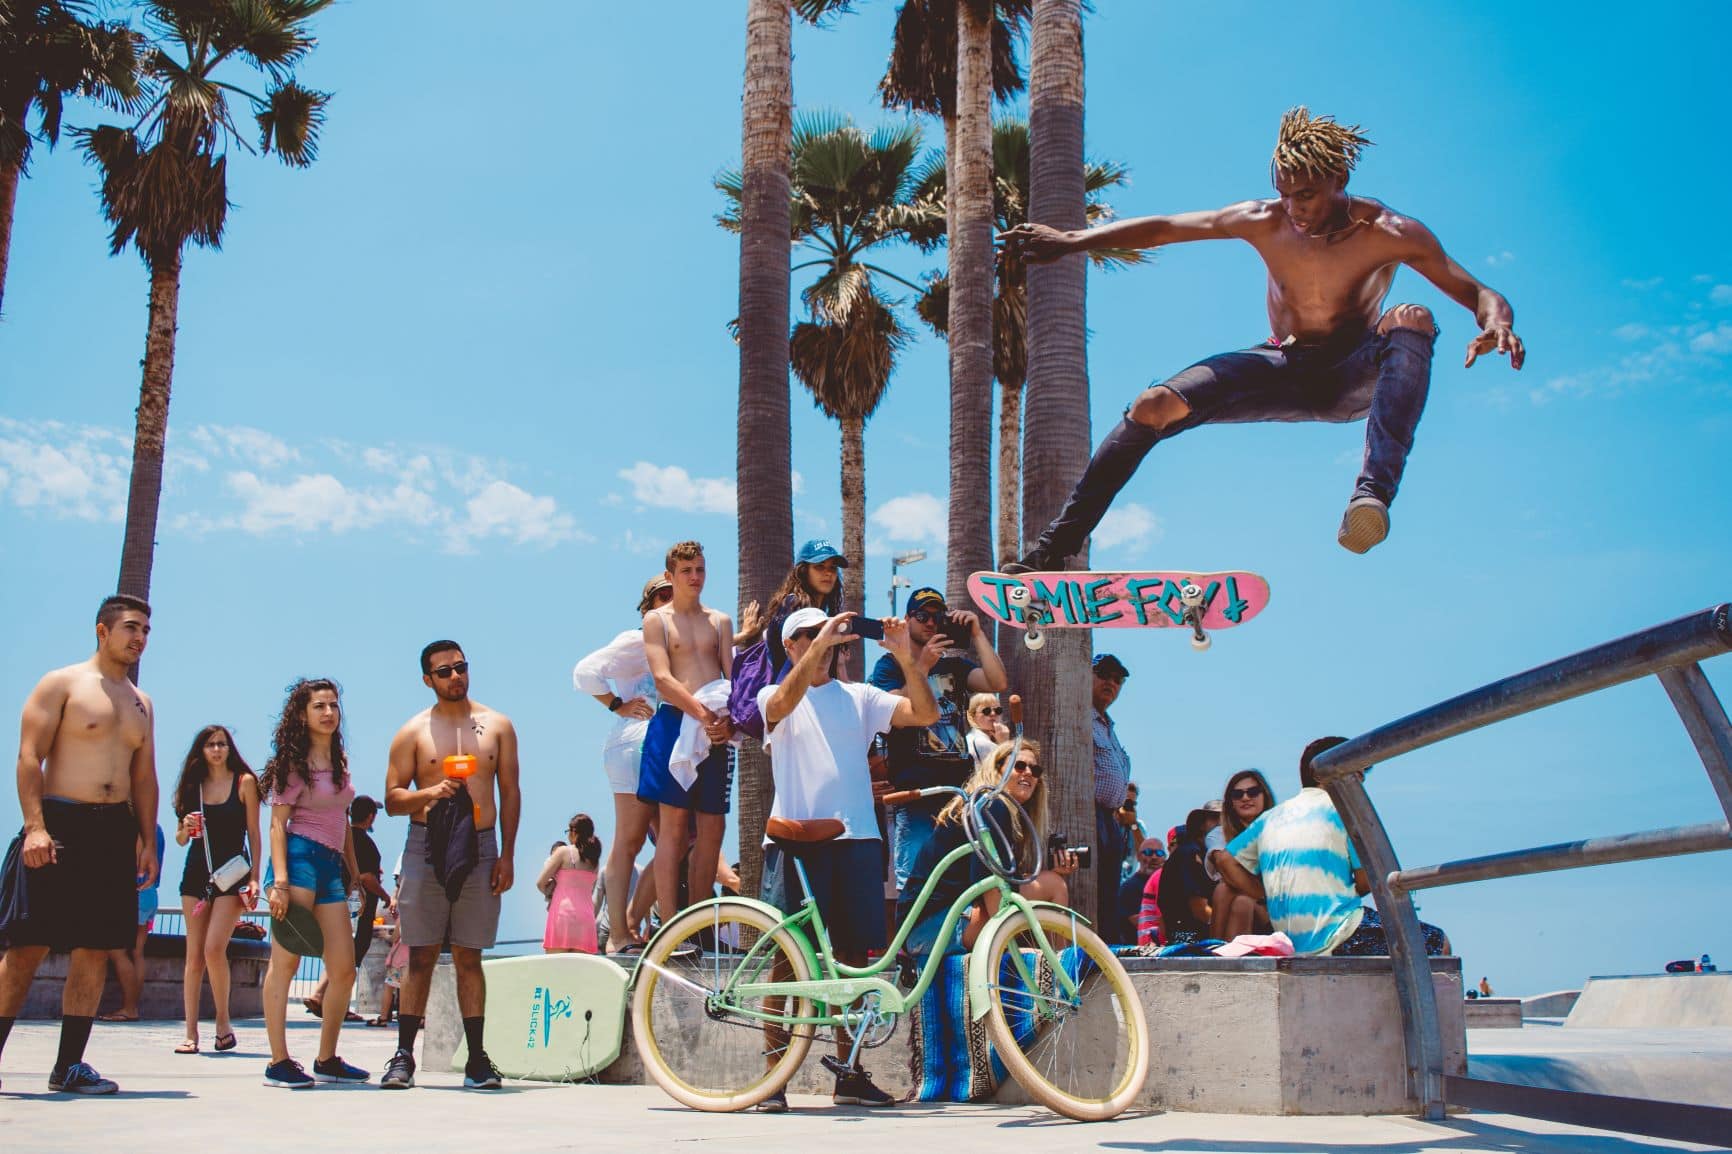 Surfers in front of spectators on Venice Beach in Los Angeles